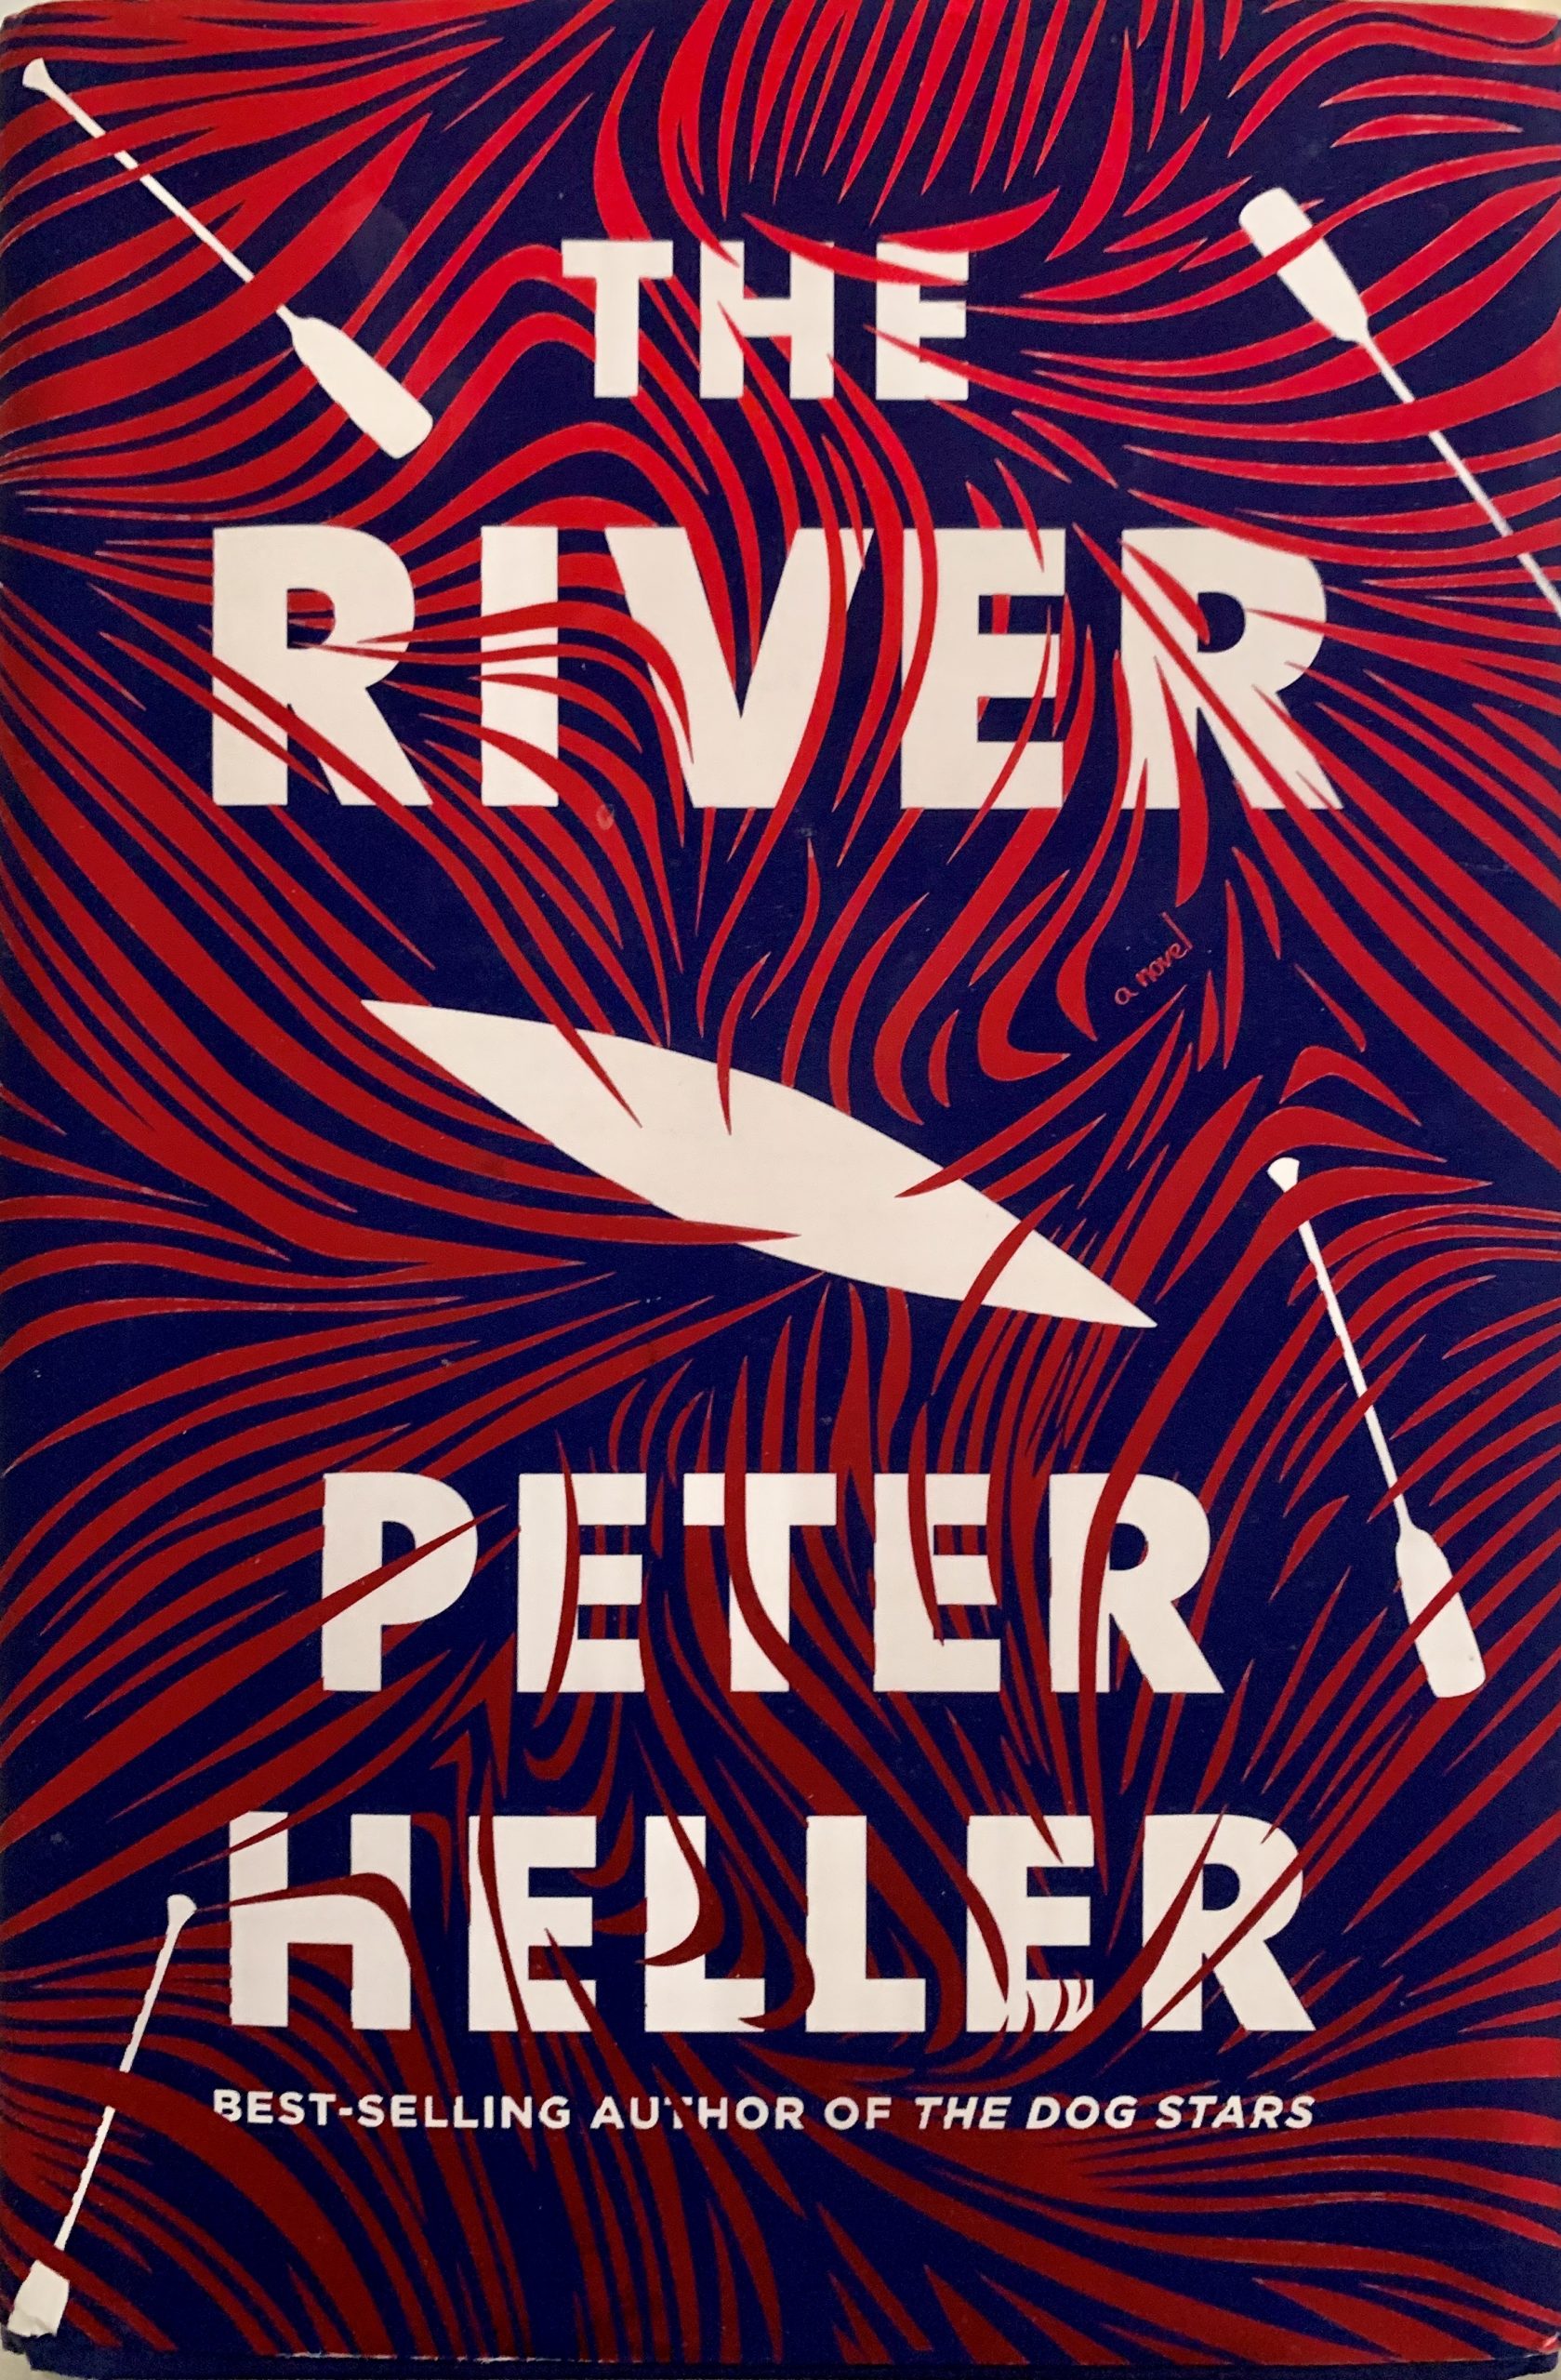 the river book by peter heller